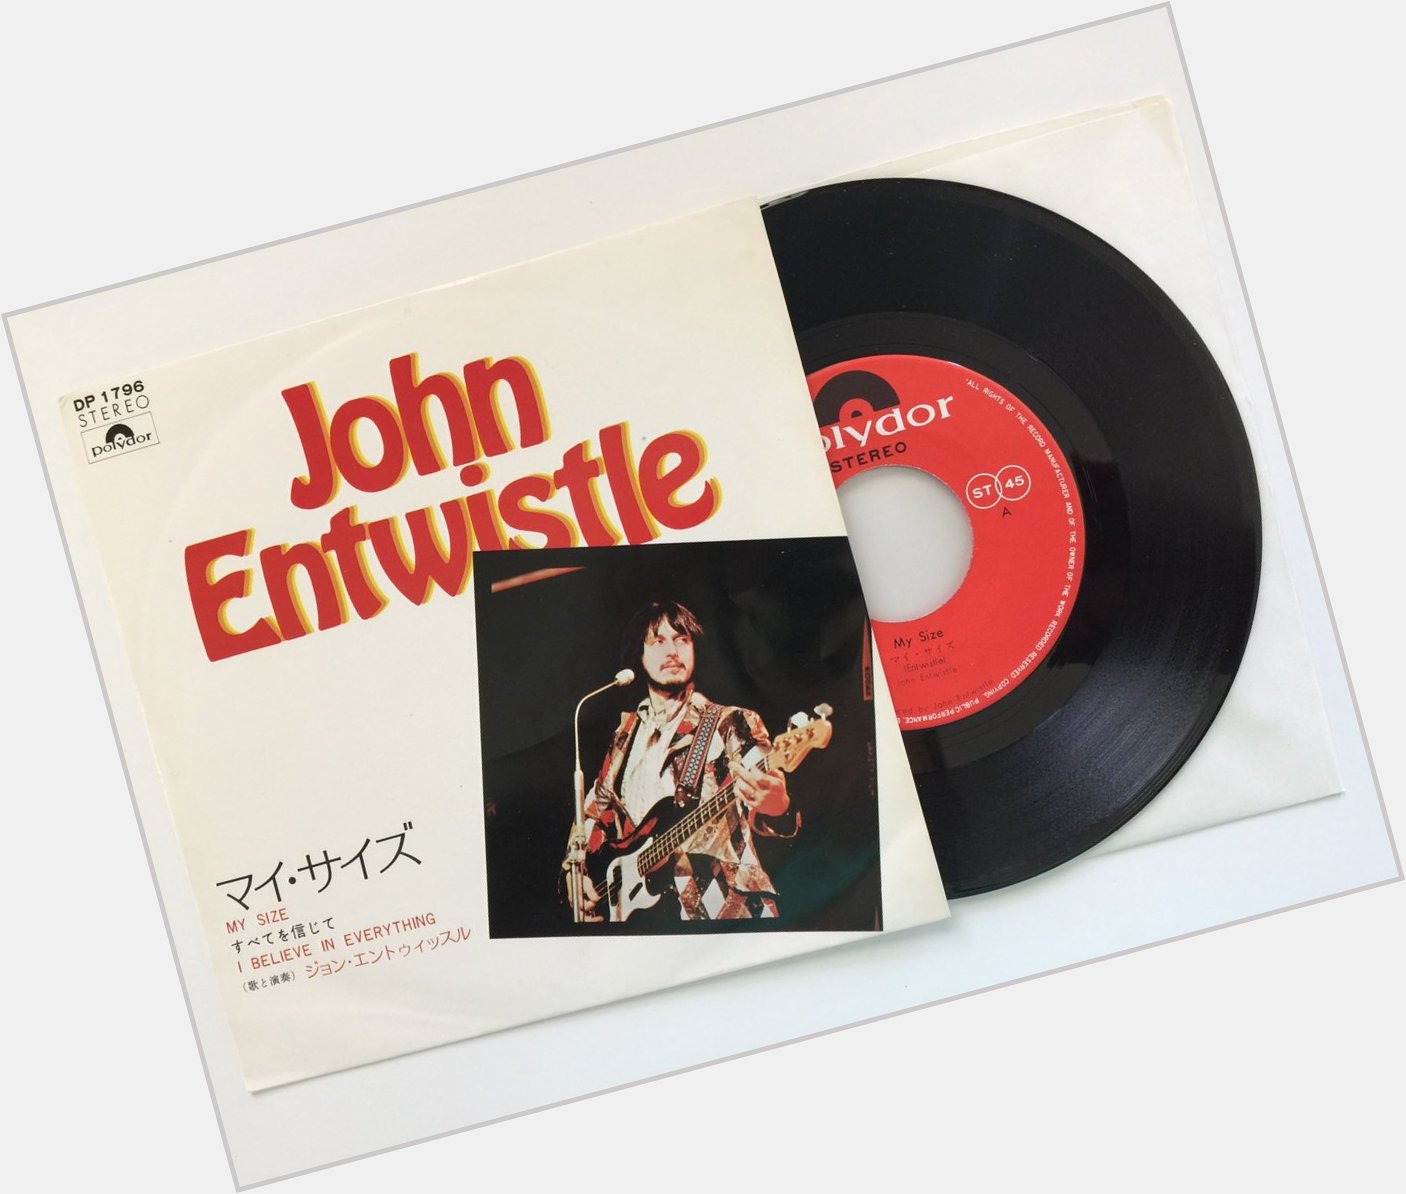 Happy 75th Birthday to the late great John Entwistle! 